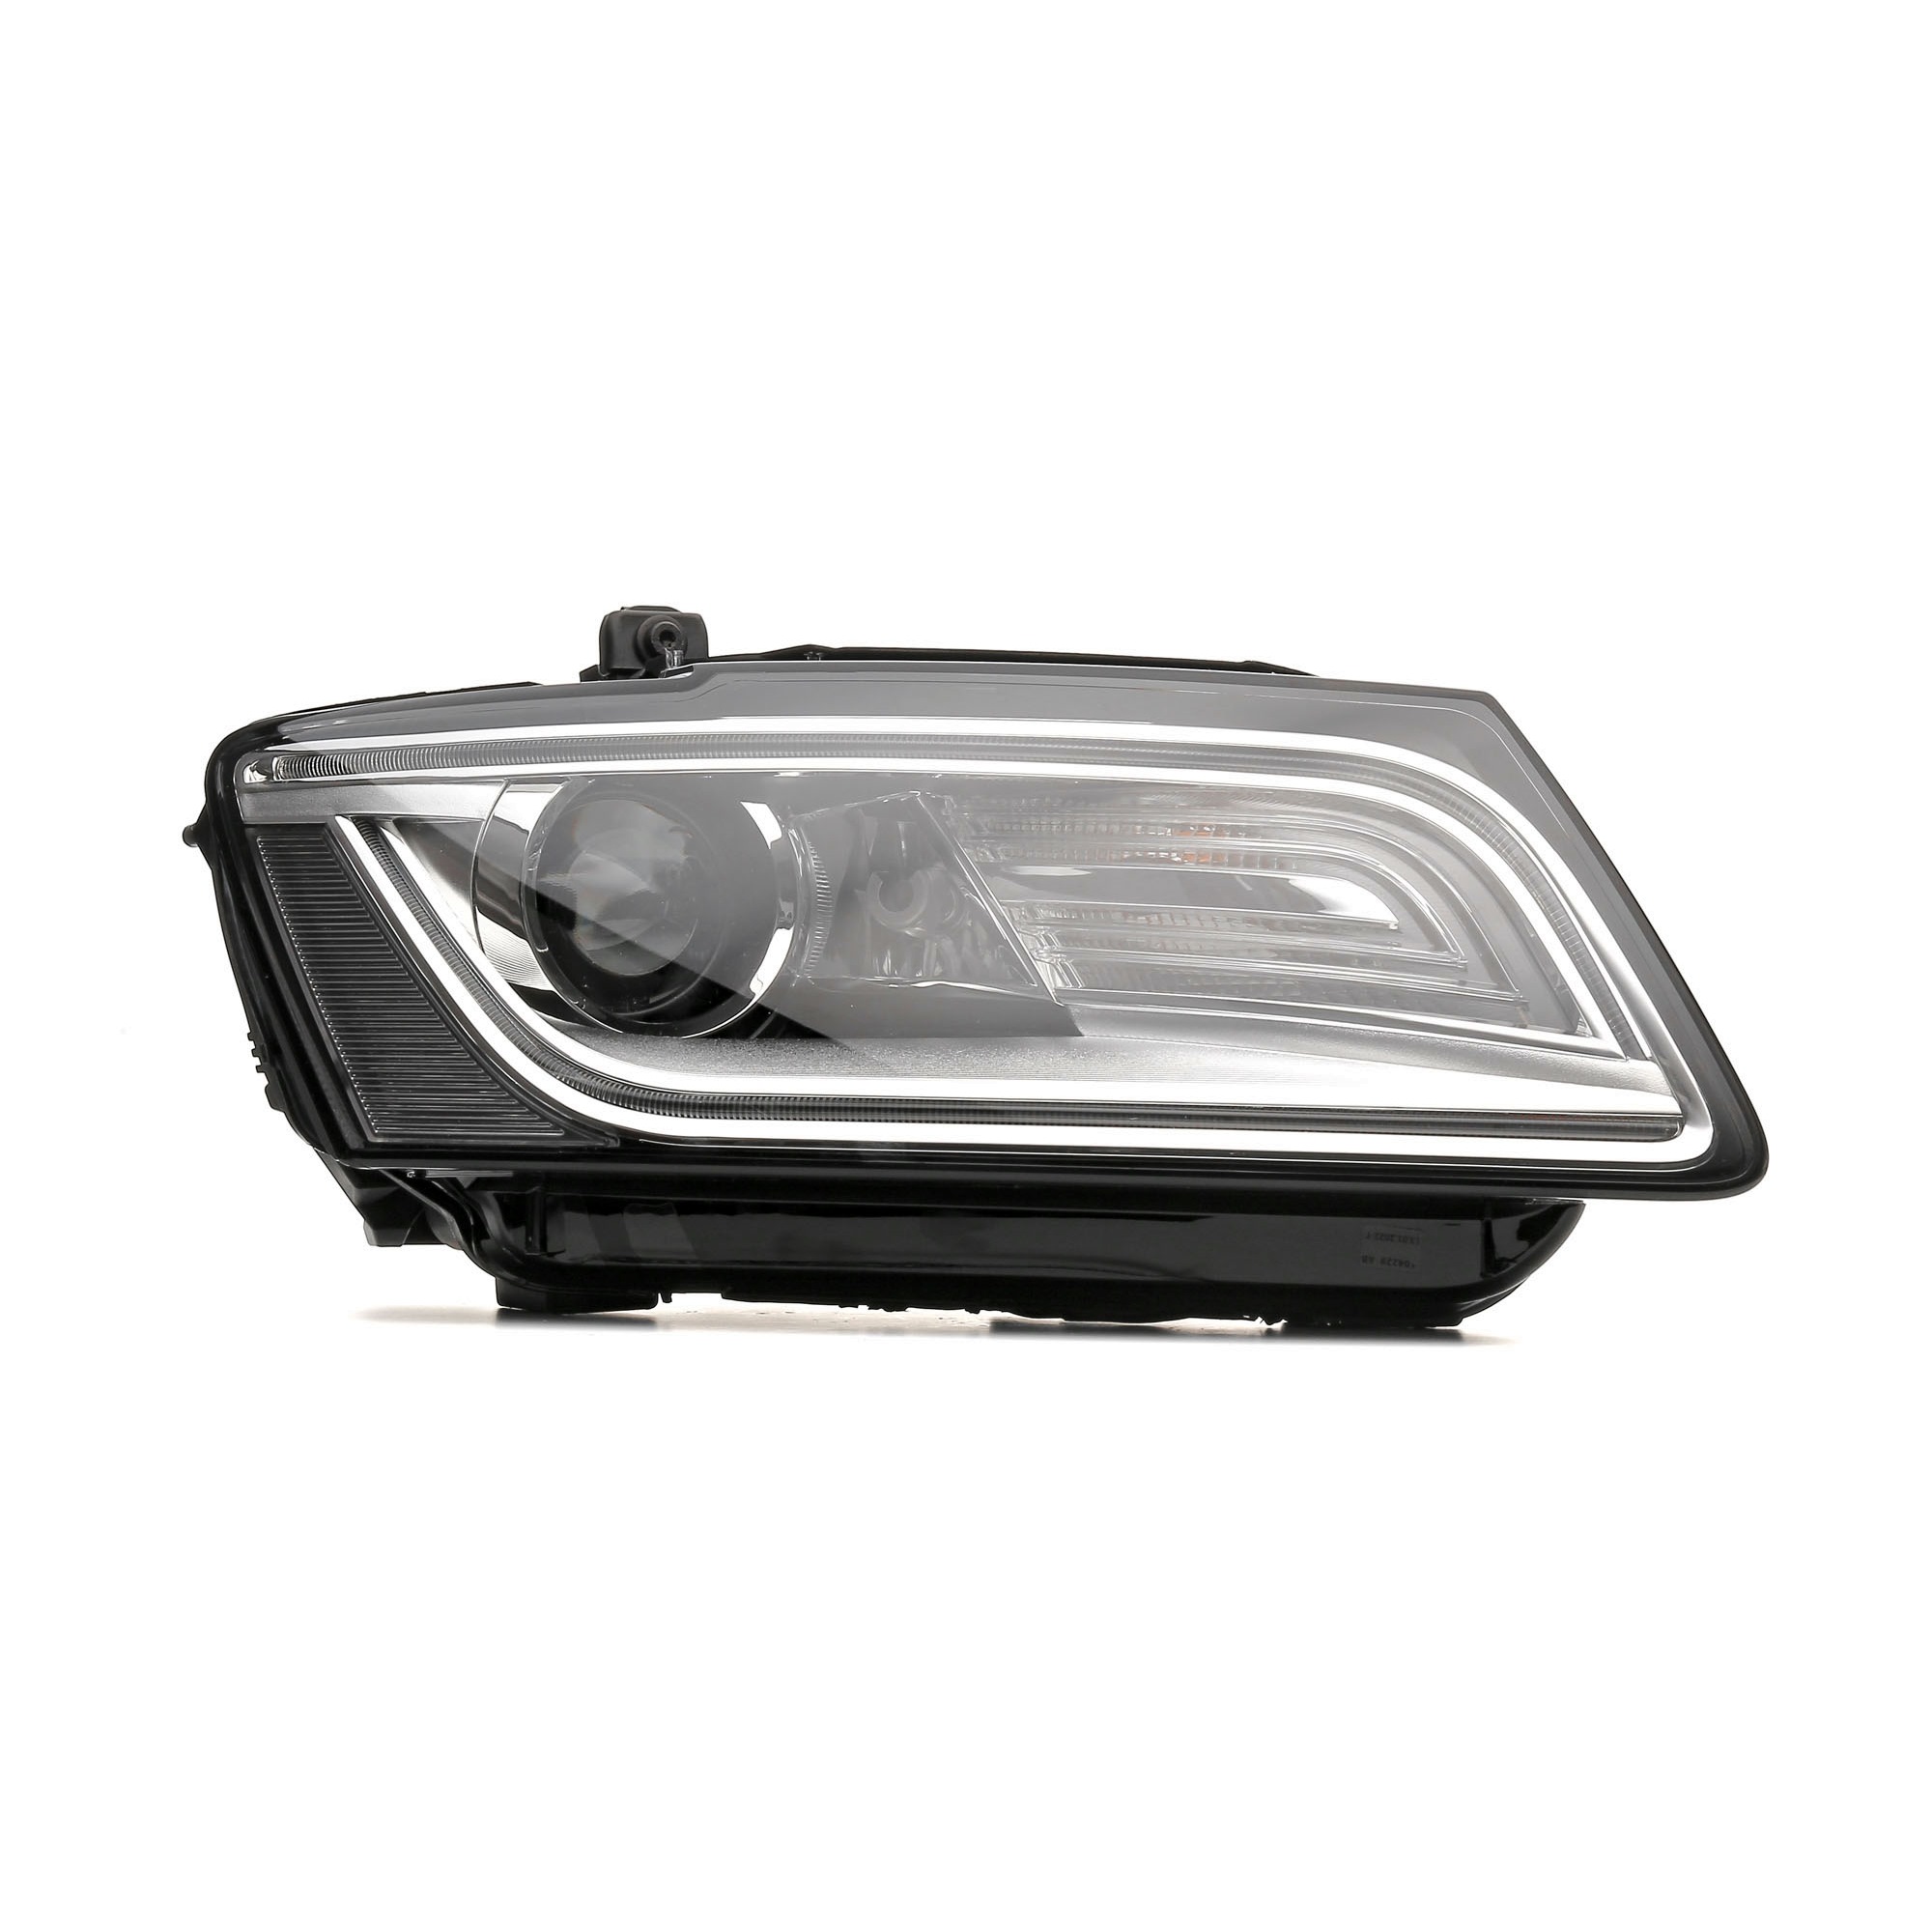 044874 VALEO Headlight AUDI Right, D3S, H7, PSY24W, Bi-Xenon, LED, transparent, with low beam, with high beam, with dynamic bending light, with daytime running light, for right-hand traffic, without motor for headlamp levelling, without control unit for Xenon